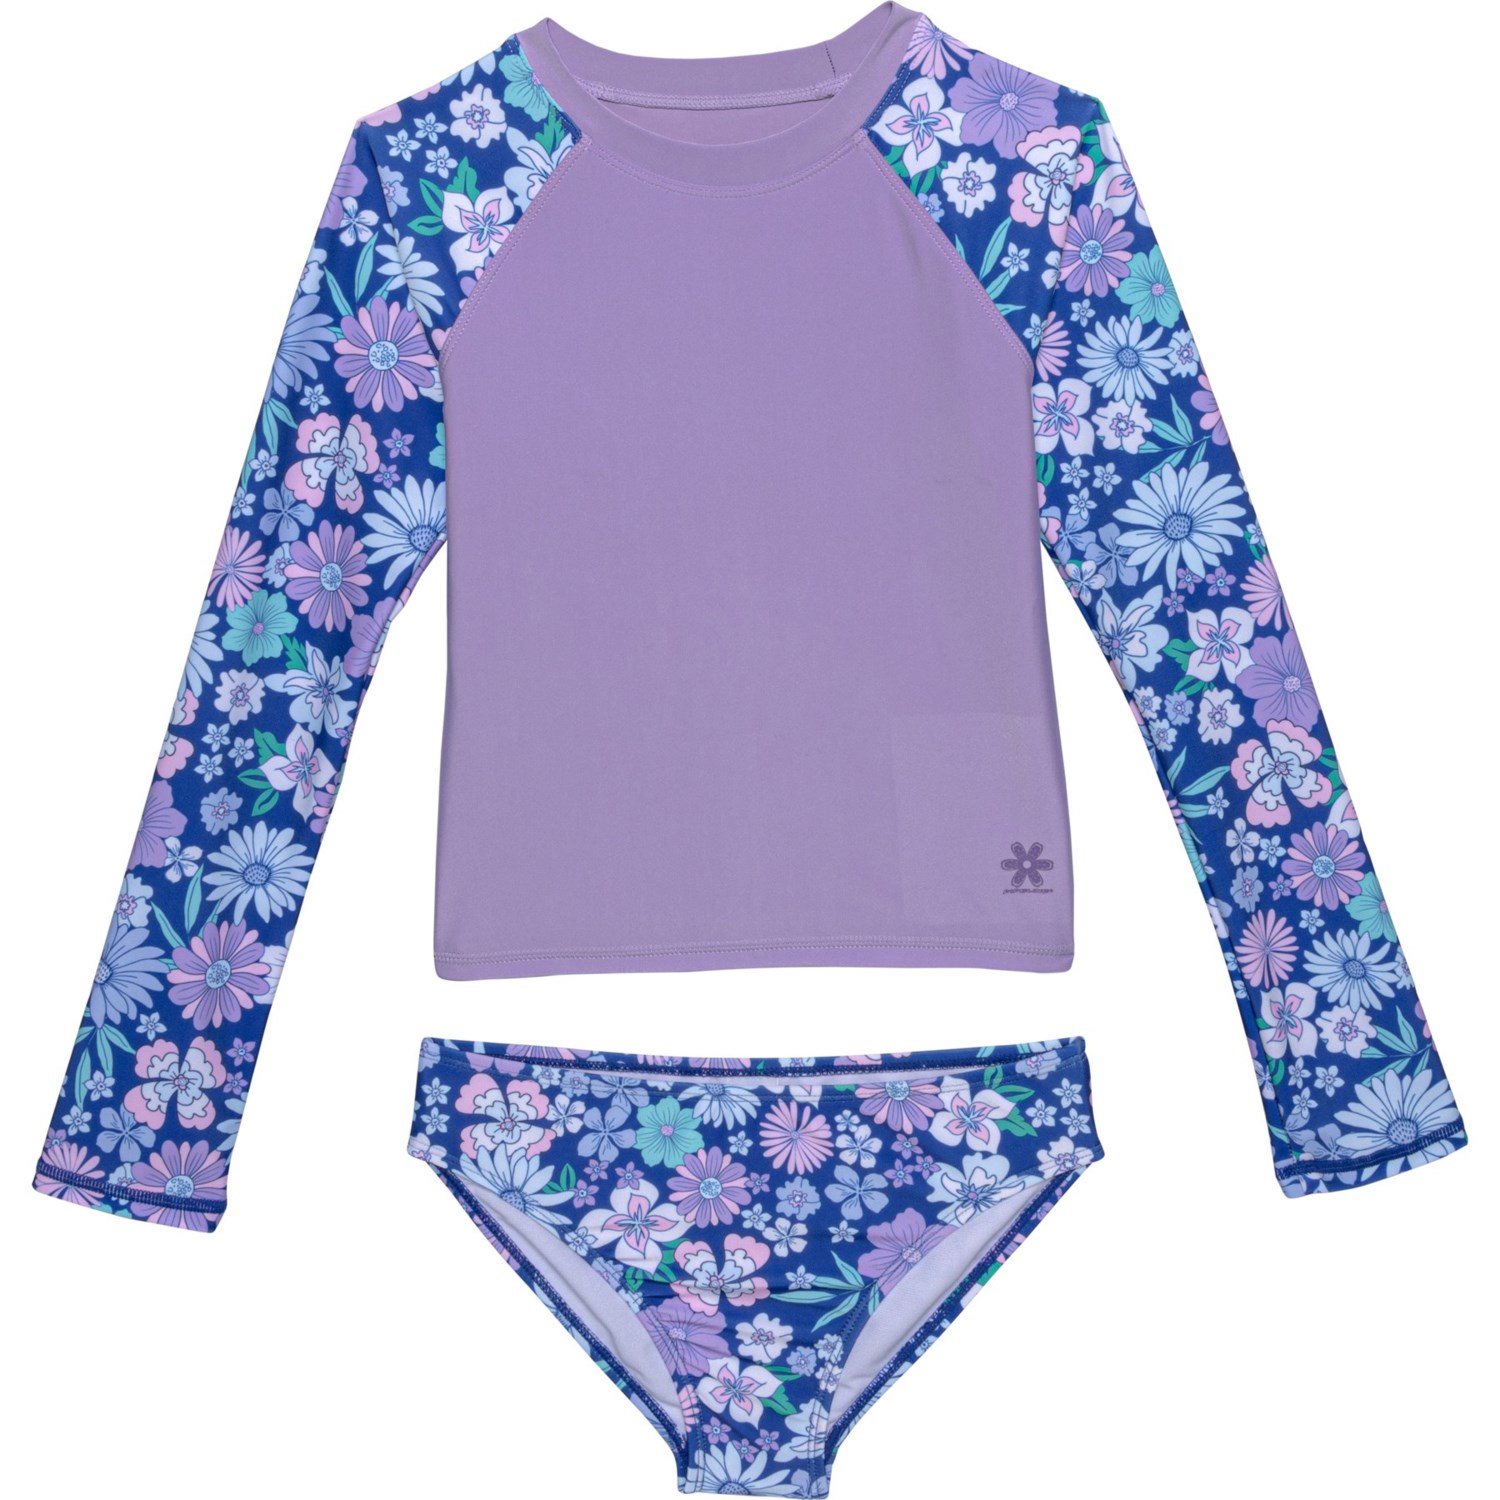 Pipeline Big Girls Rash Guard and Swim Bottoms Set | Purple Floral | Size 6X | Stretchy Fabric | Quick-drying